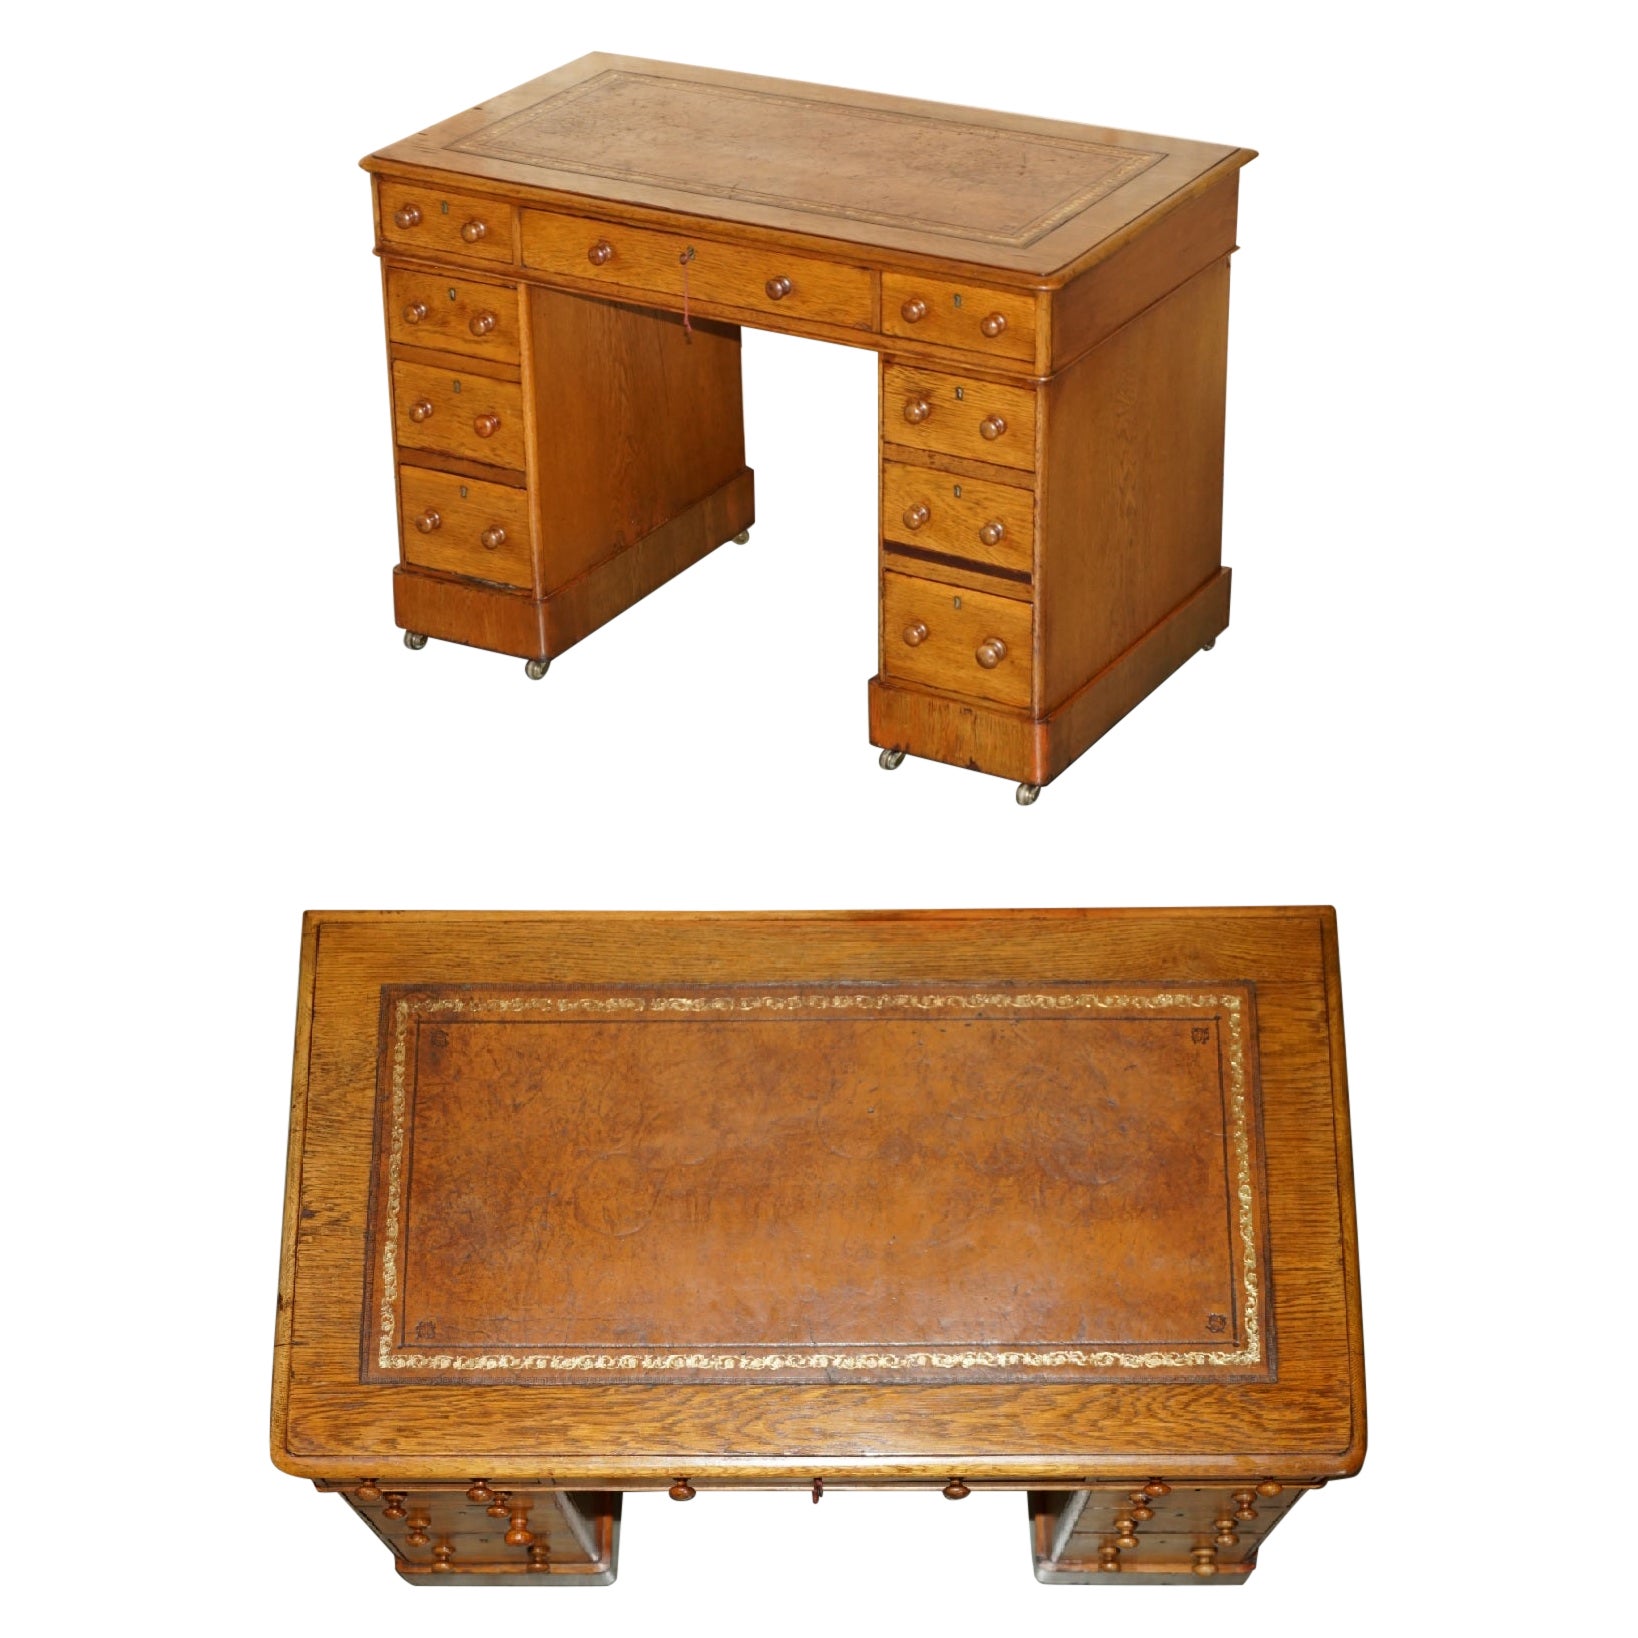 STUNNING ANTiQUE VICTORIAN HONEY OAK TWIN PEDESTAL DESK HAND DYED BROWN LEATHER For Sale